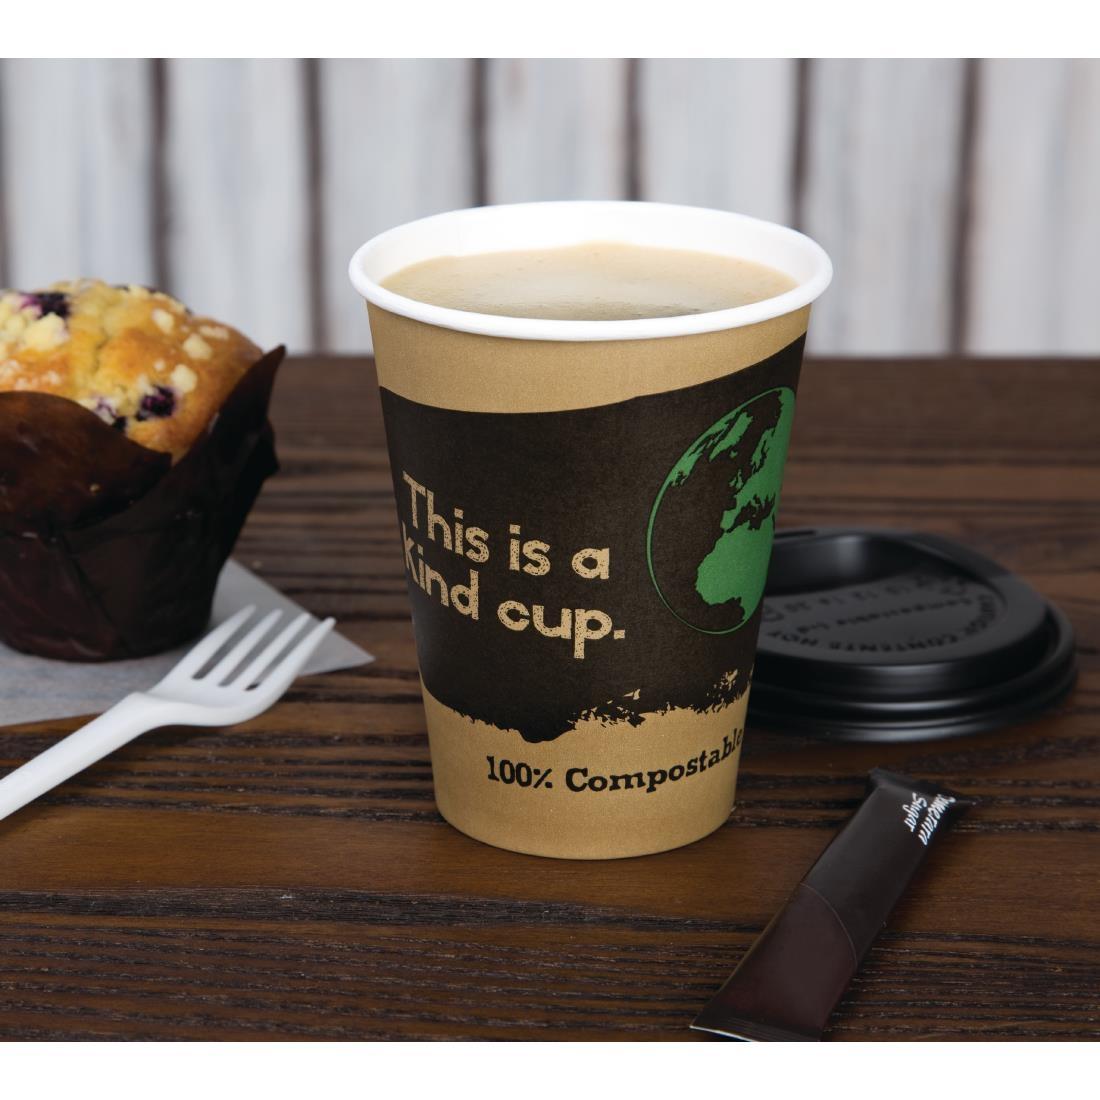 Fiesta Green 12oz Compostable Hot Cups and Lids Bundle (Pack of 1000) - SA486  - 5